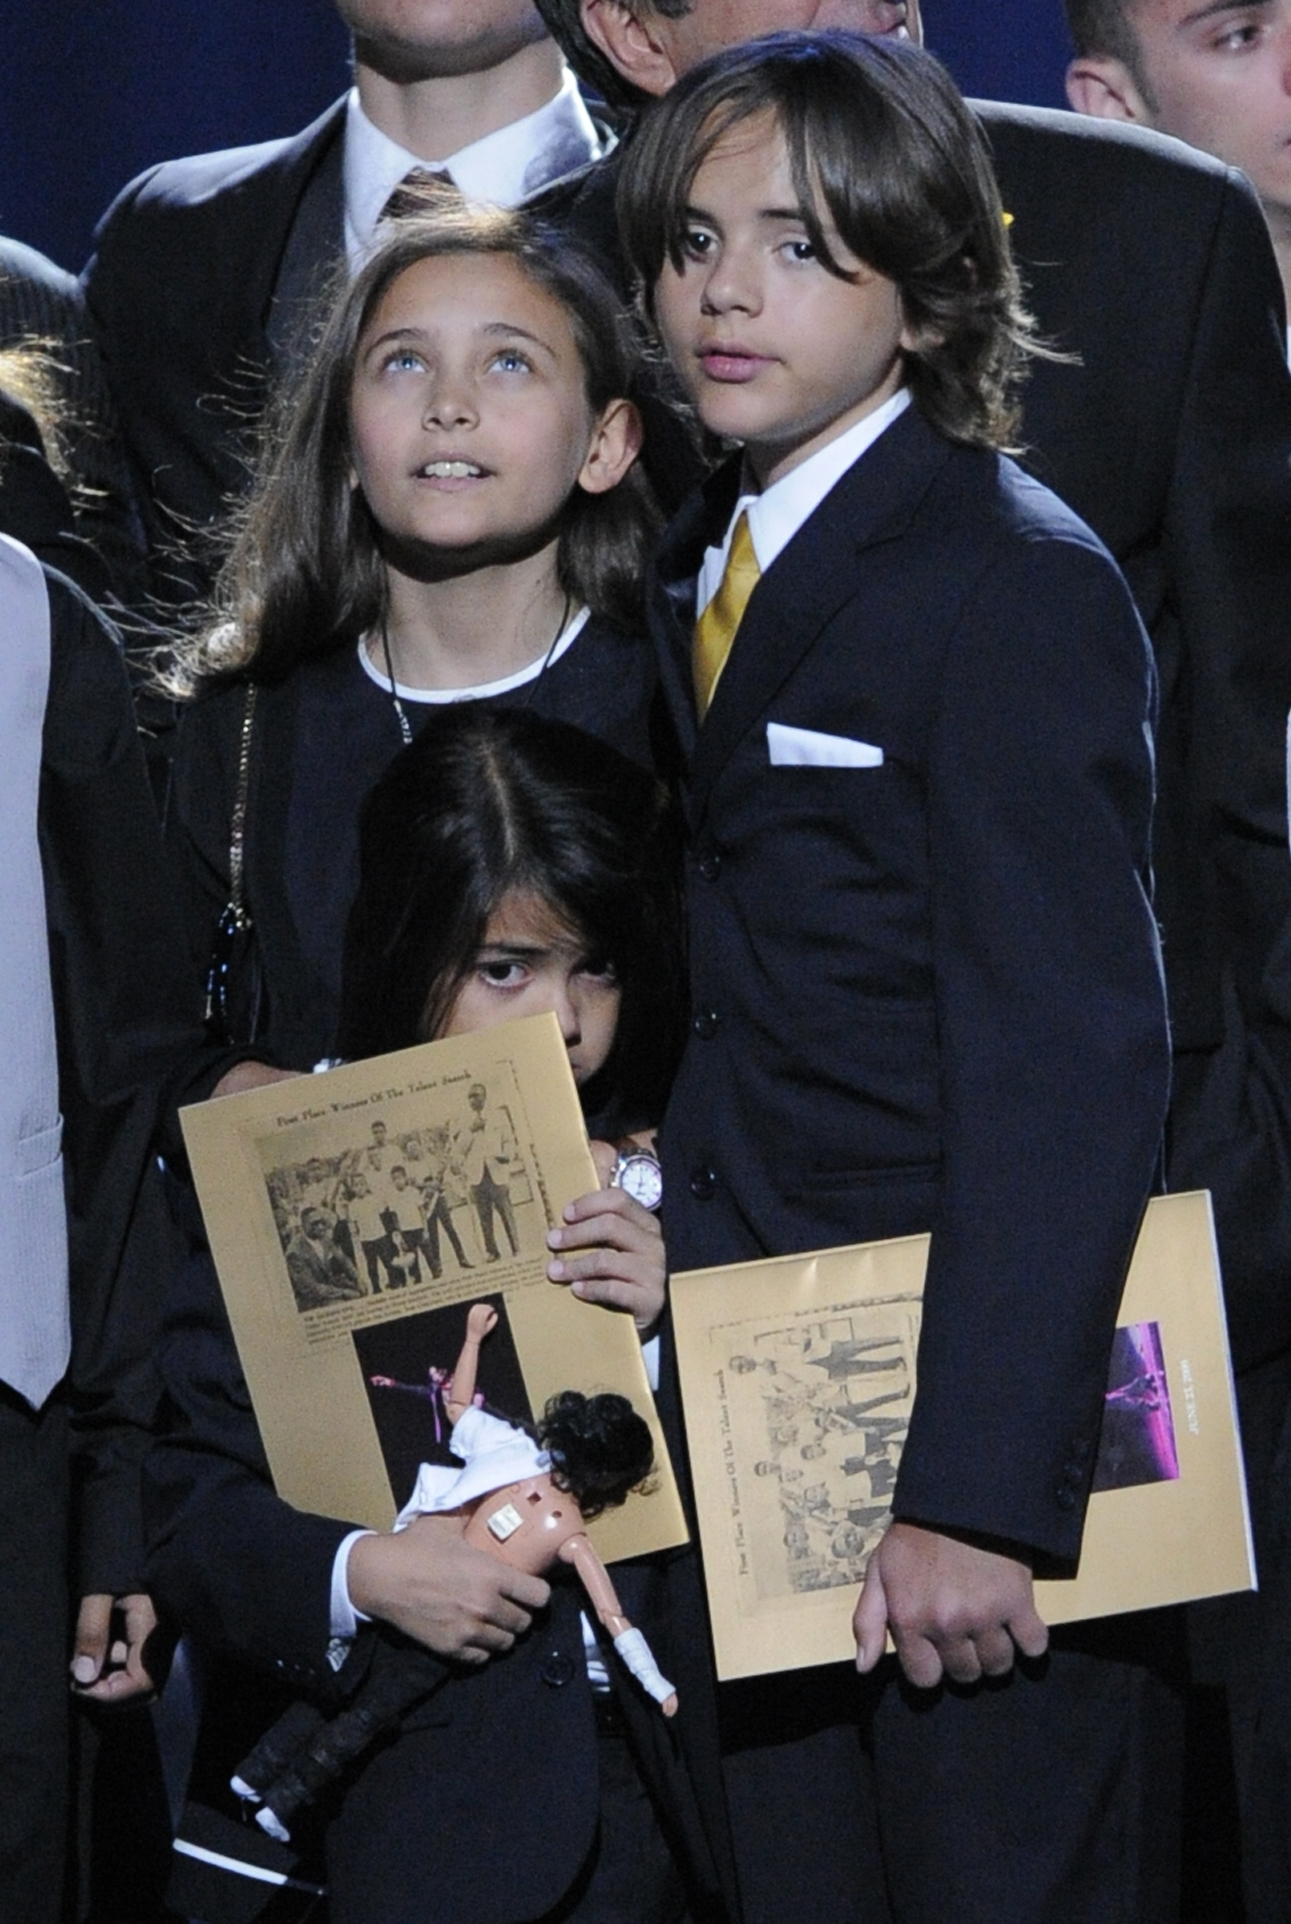 PHOTO: Paris Jackson, left, Prince Michael Jackson II, center, and Prince Michael Jackson I, children of Michael Jackson, stand on stage during the memorial service for their father at the Staples Center in Los Angeles, on July 7, 2009. 